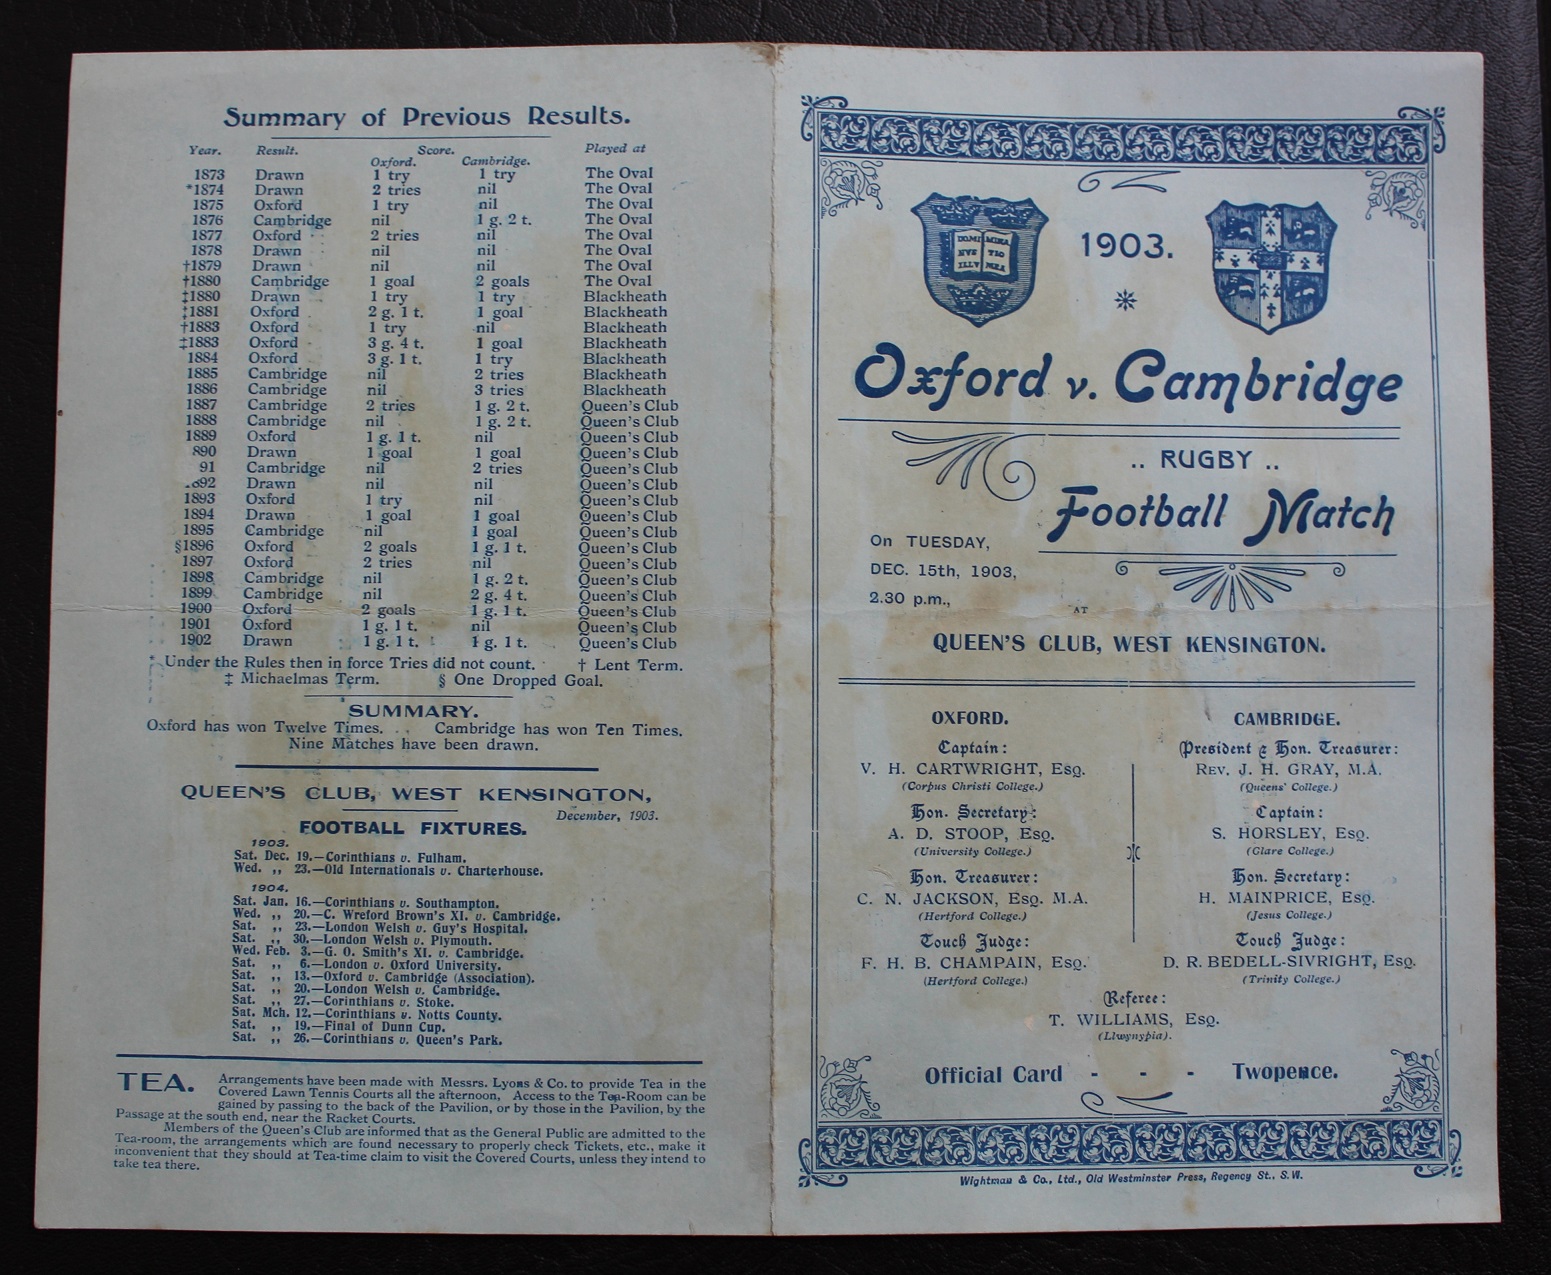 1903 Oxford v Cambrige - official match programme - Rugby Memorabilia Society - 1